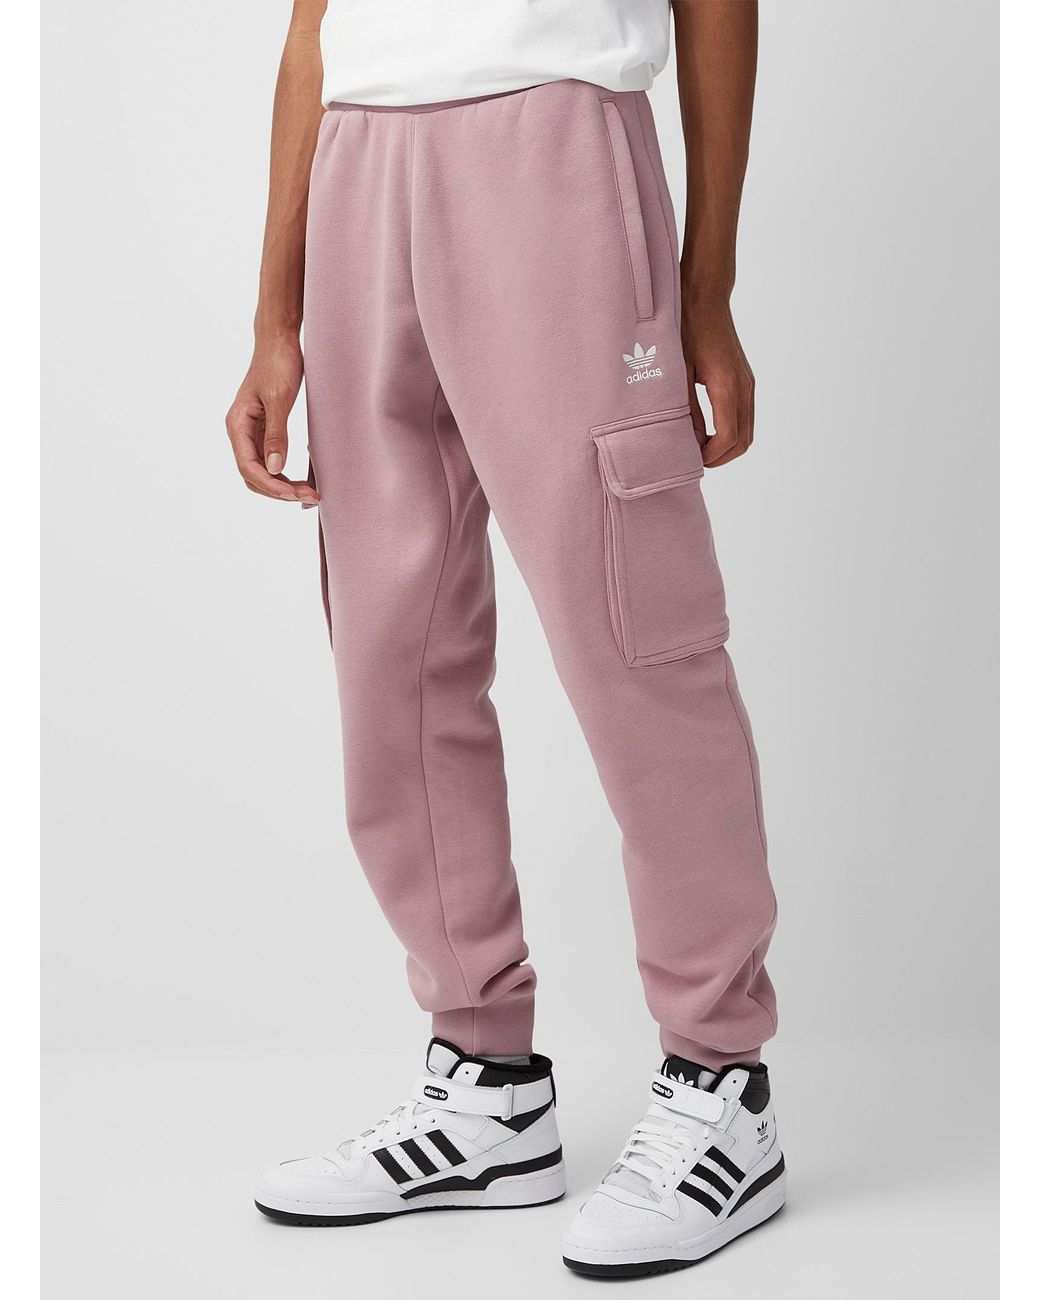 adidas mens tapered track pants for women walmart